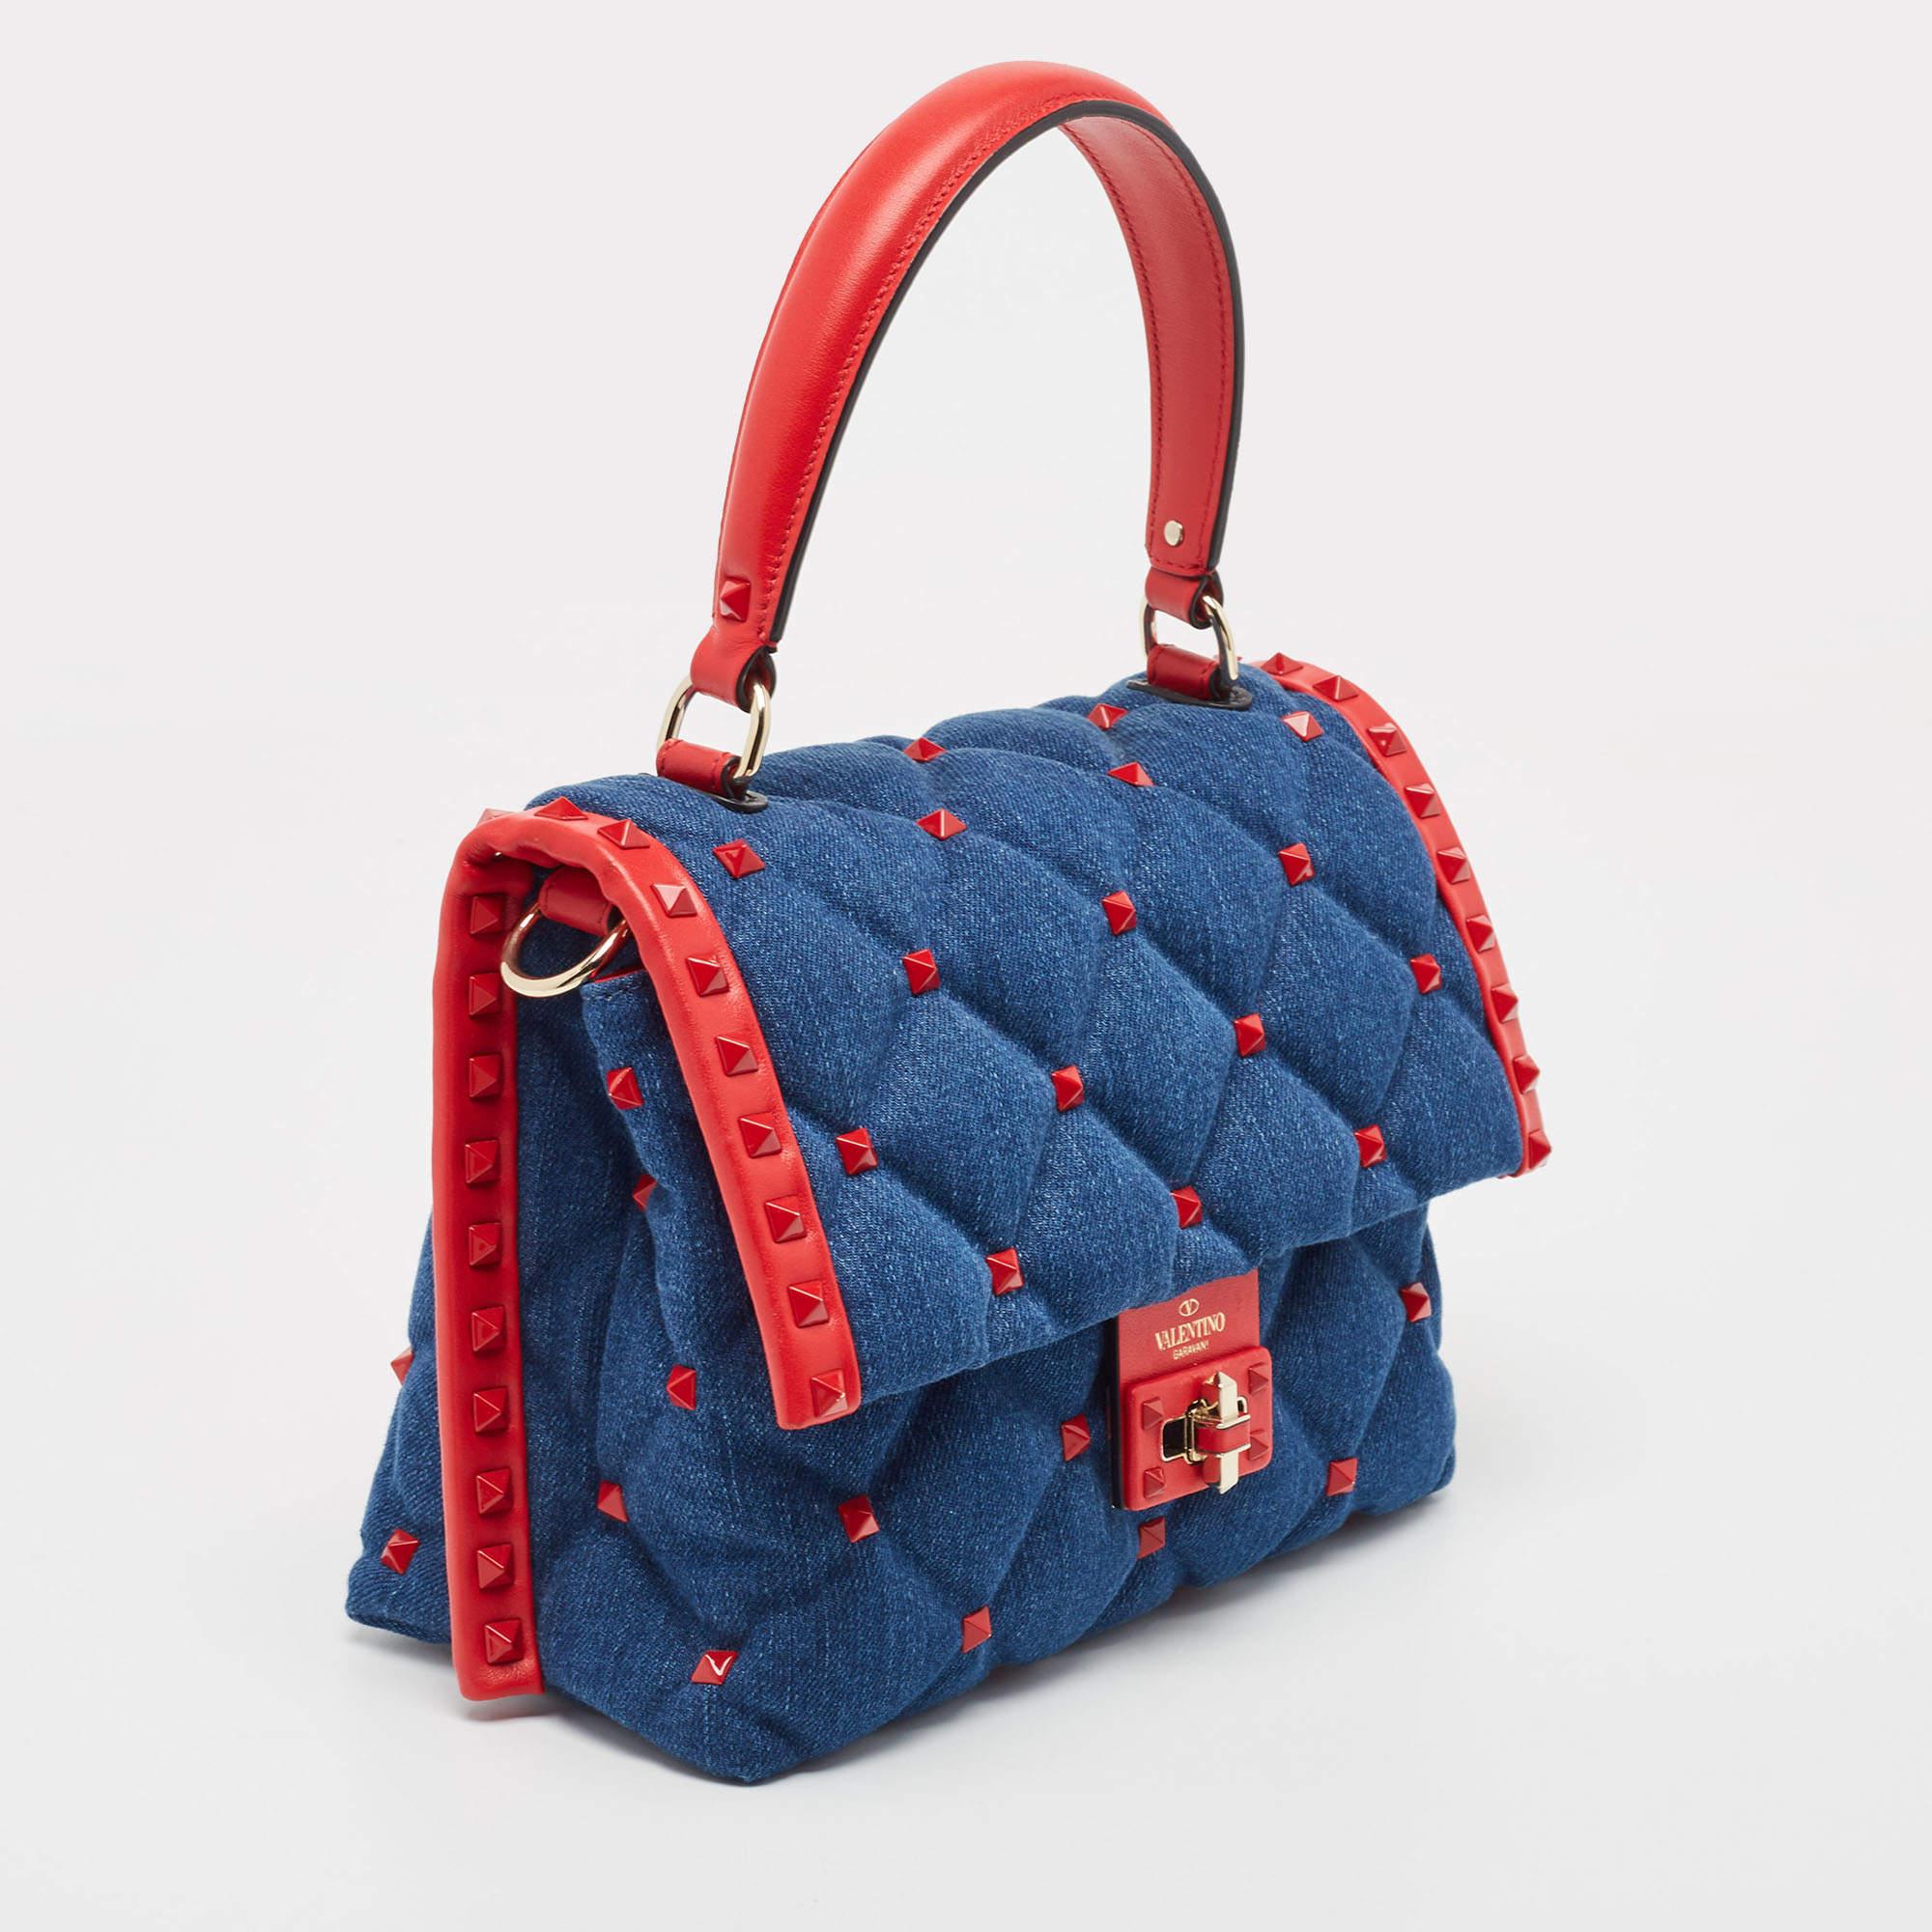 Valentino Blue/Red Denim and Leather Candystud Top Handle Bag In Excellent Condition For Sale In Dubai, Al Qouz 2